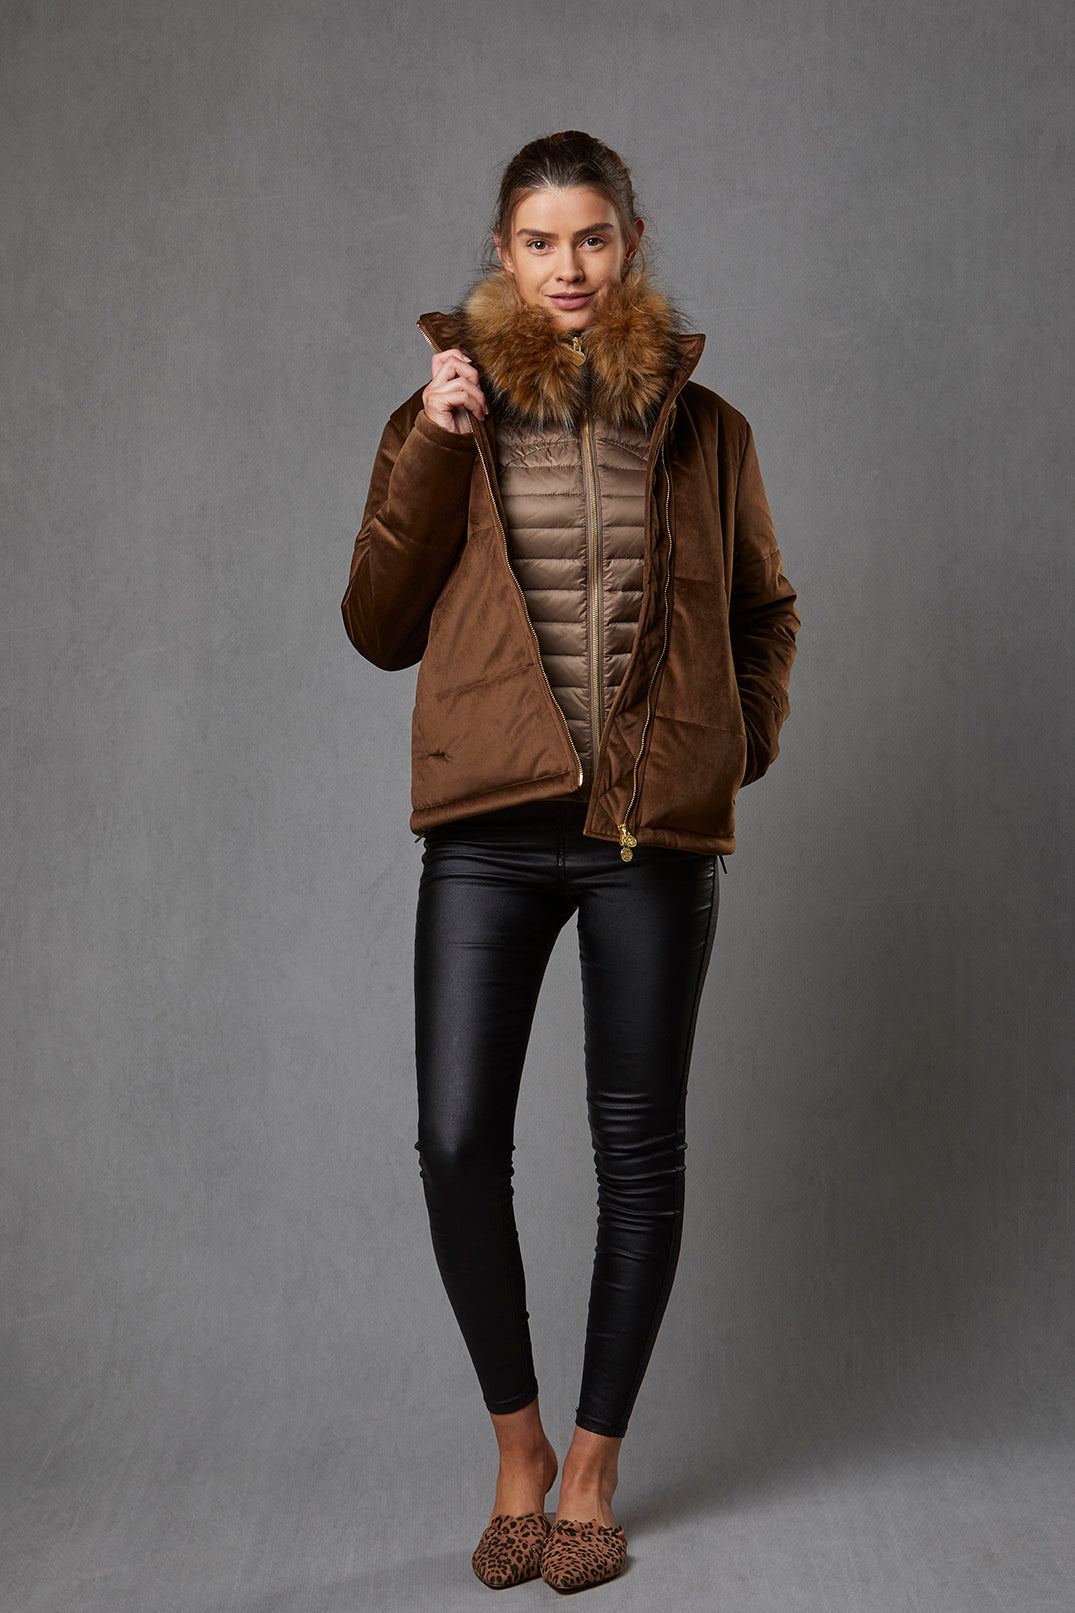 Model wearing a women's puffer gilet in a khaki, bronze colour. The gilet has a detachable faux fur collar and stretch sides. The puffer gilet has a branded gold zip. The model is also wearing a brown puffer jacket over the gilet.